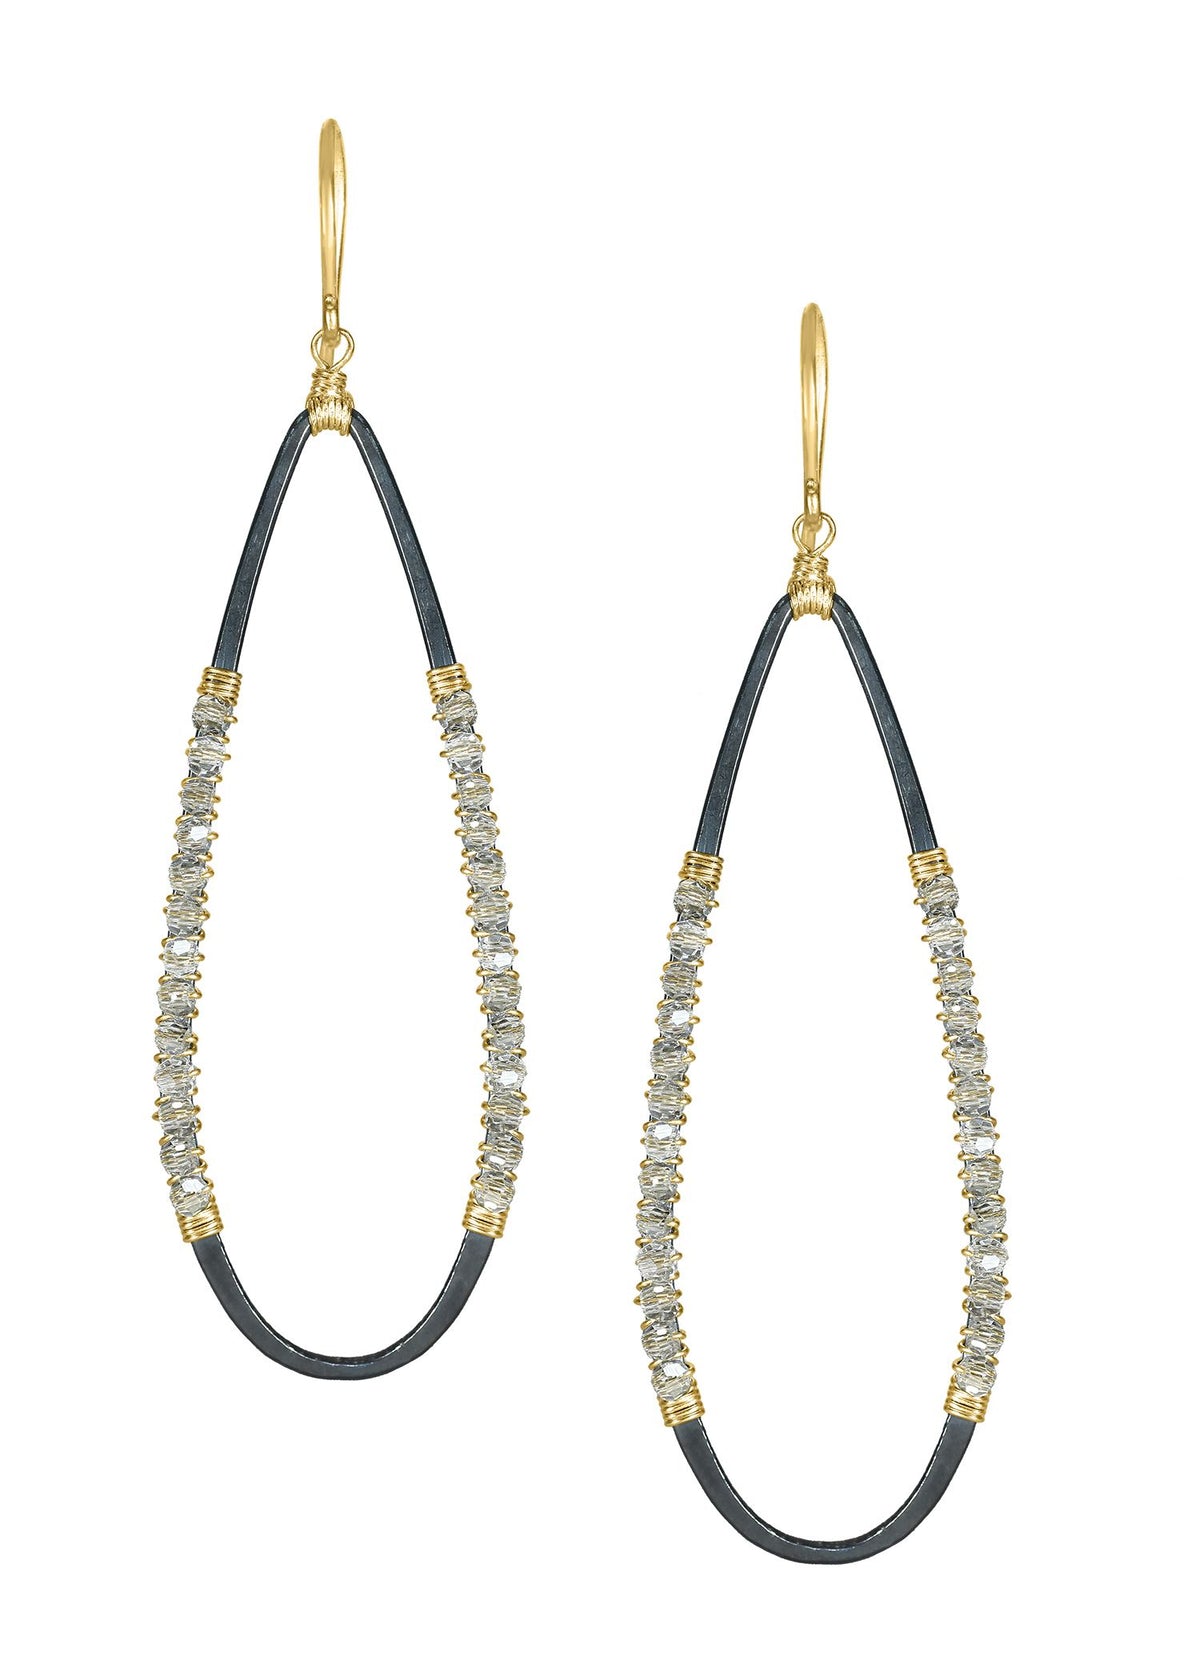 Crystal 14k gold fill Blackened sterling silver Mixed metal Earrings measure 2-3/8&quot; in length (including ear wires) and 11/16&quot; in width Handmade in our Los Angeles studio